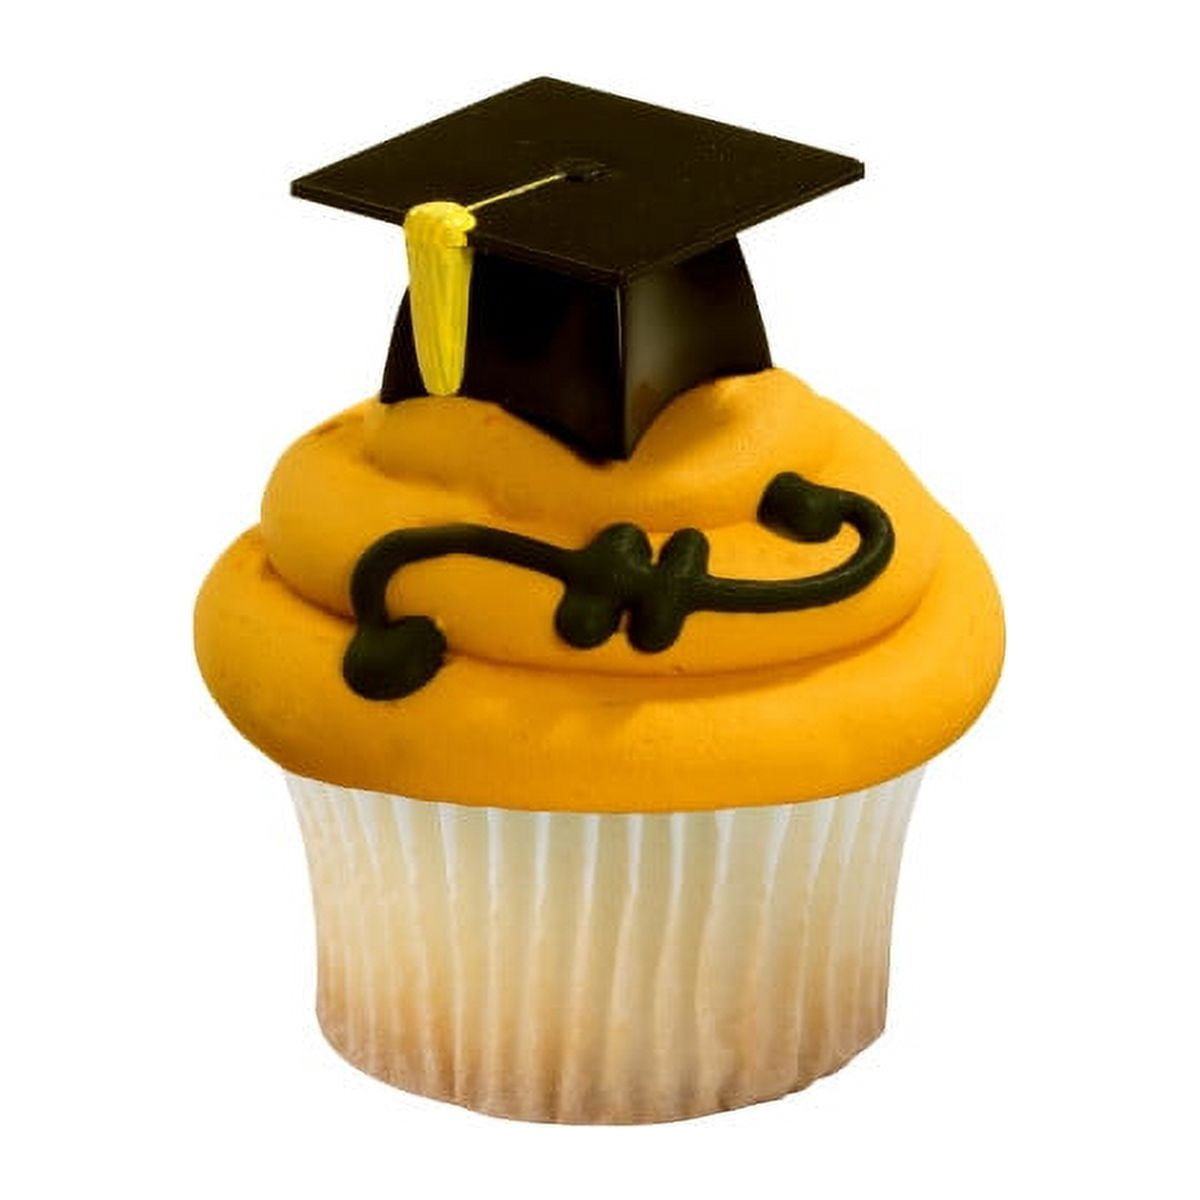 Where to buy a graduation hat — Graduations Now